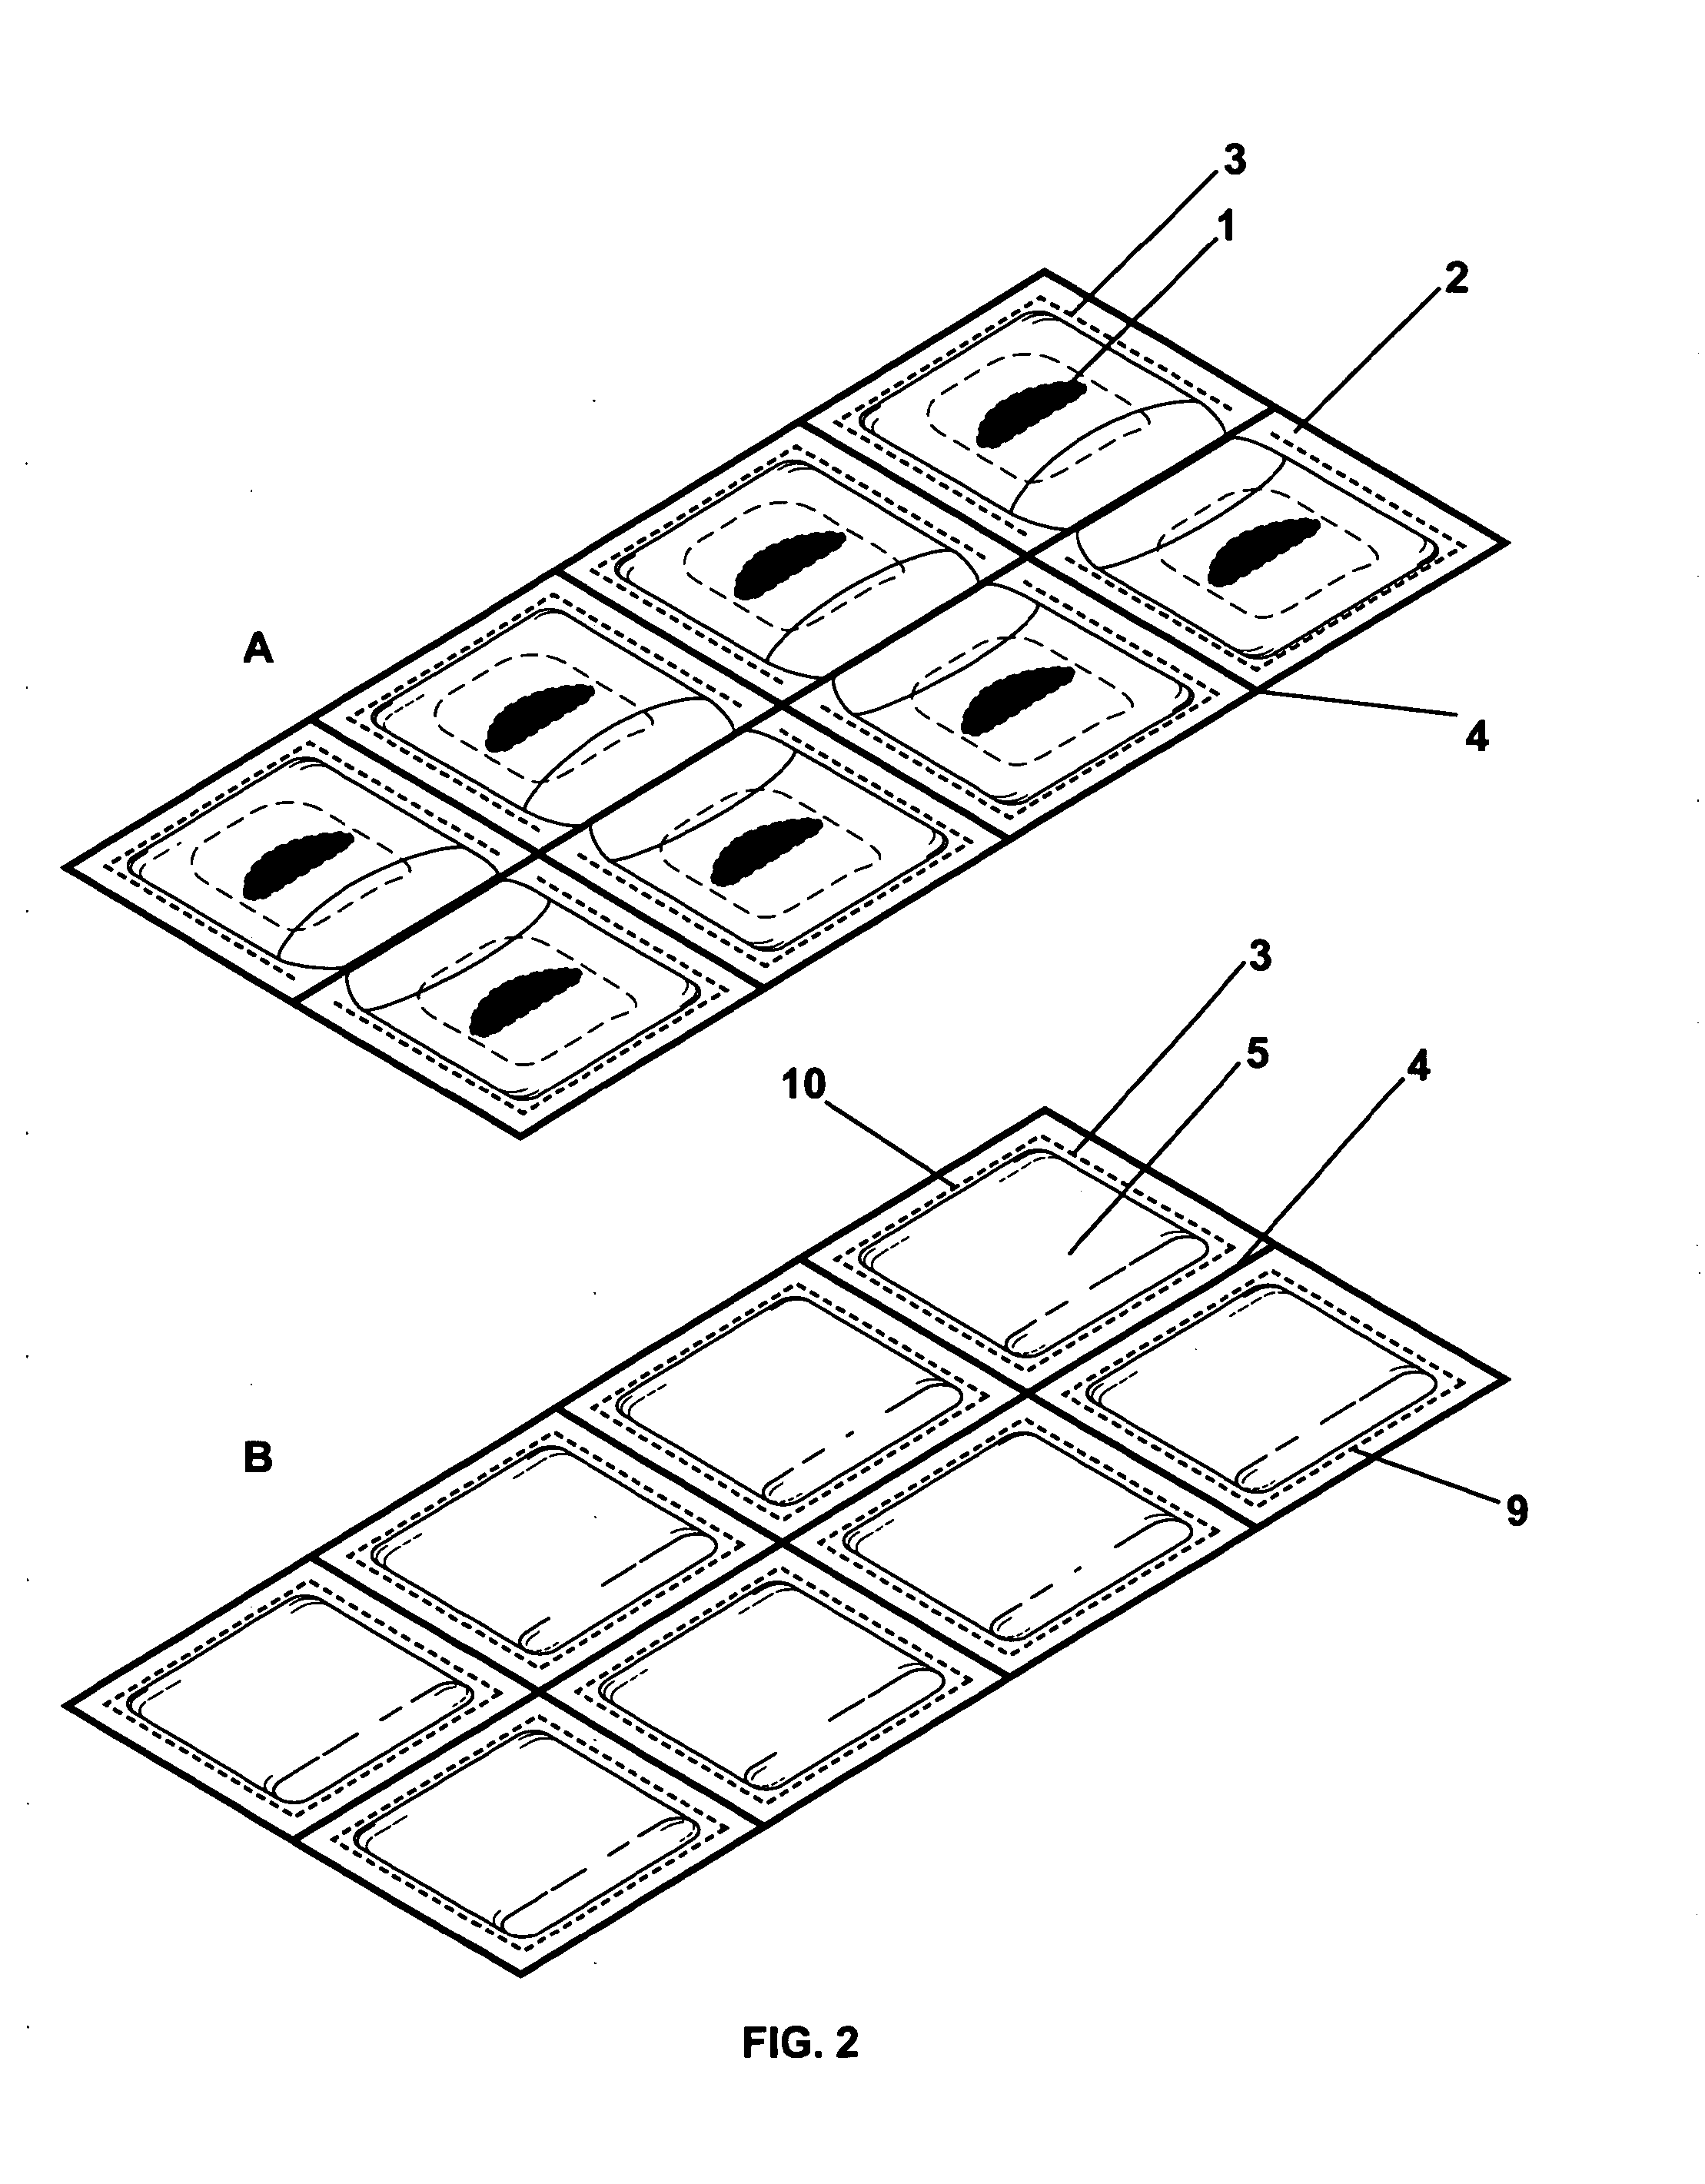 Sealed, Edible Film Packets and Methods of Making and Using Them